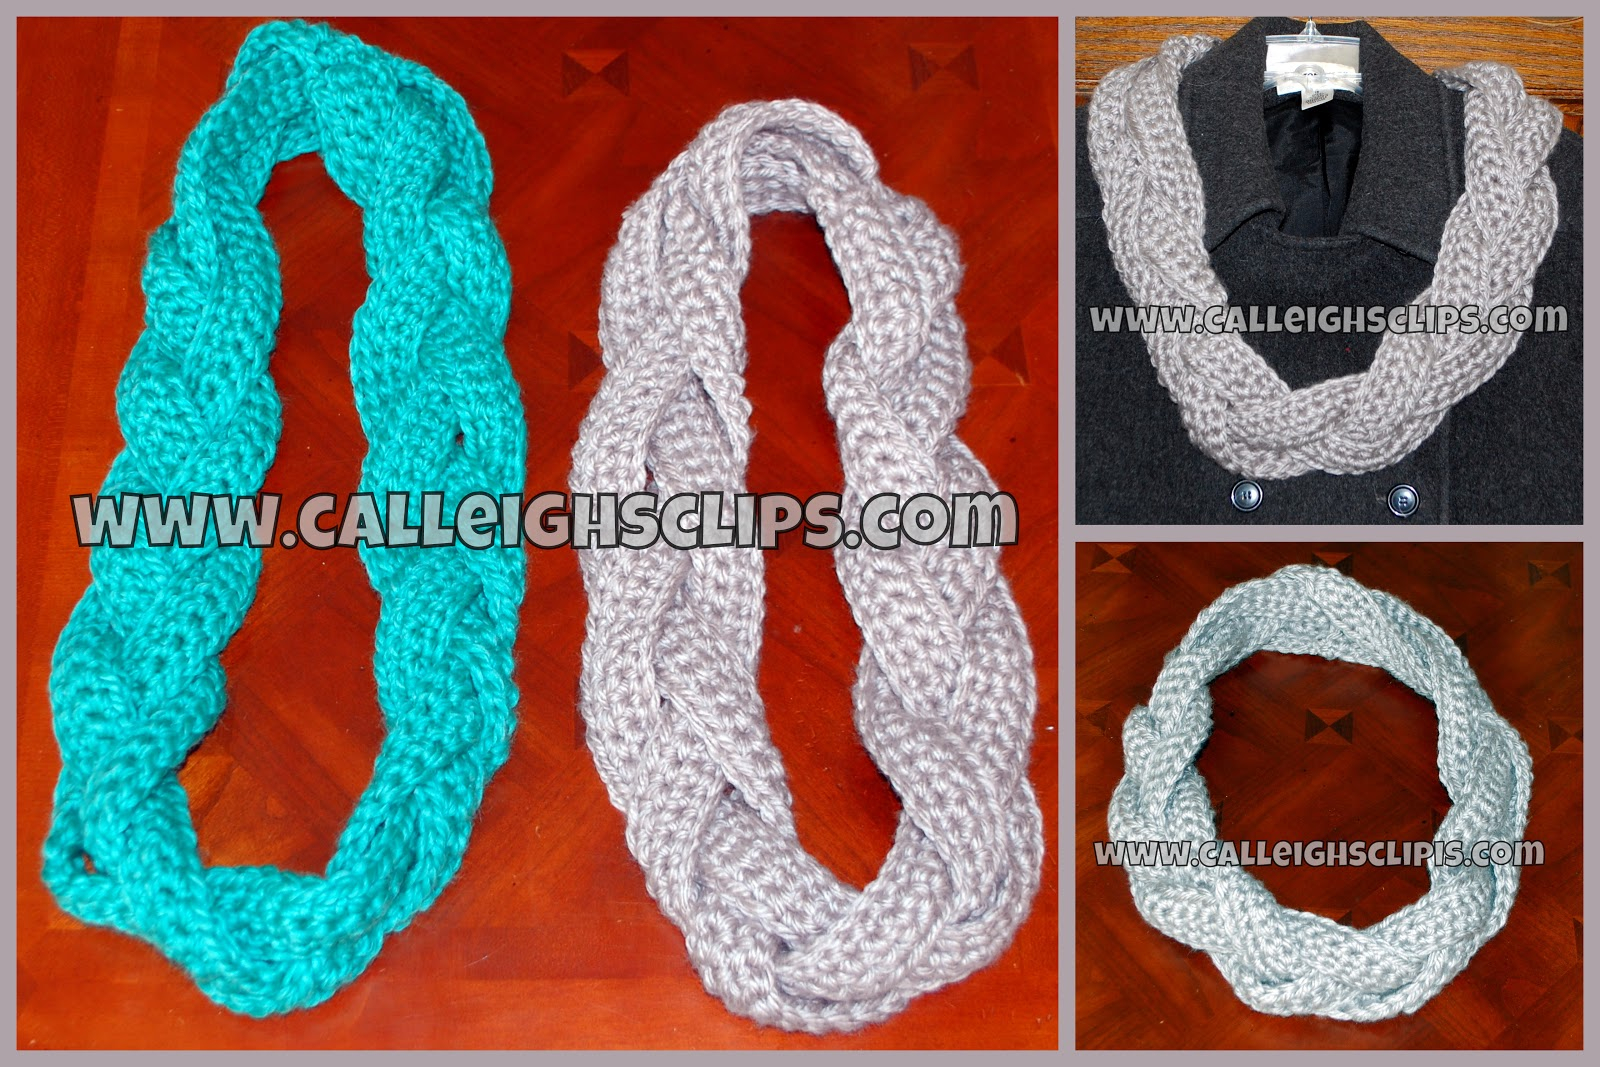 Free Chunky Cowl Crochet Pattern Calleighs Clips Crochet Creations Free Crochet Pattern Chunky